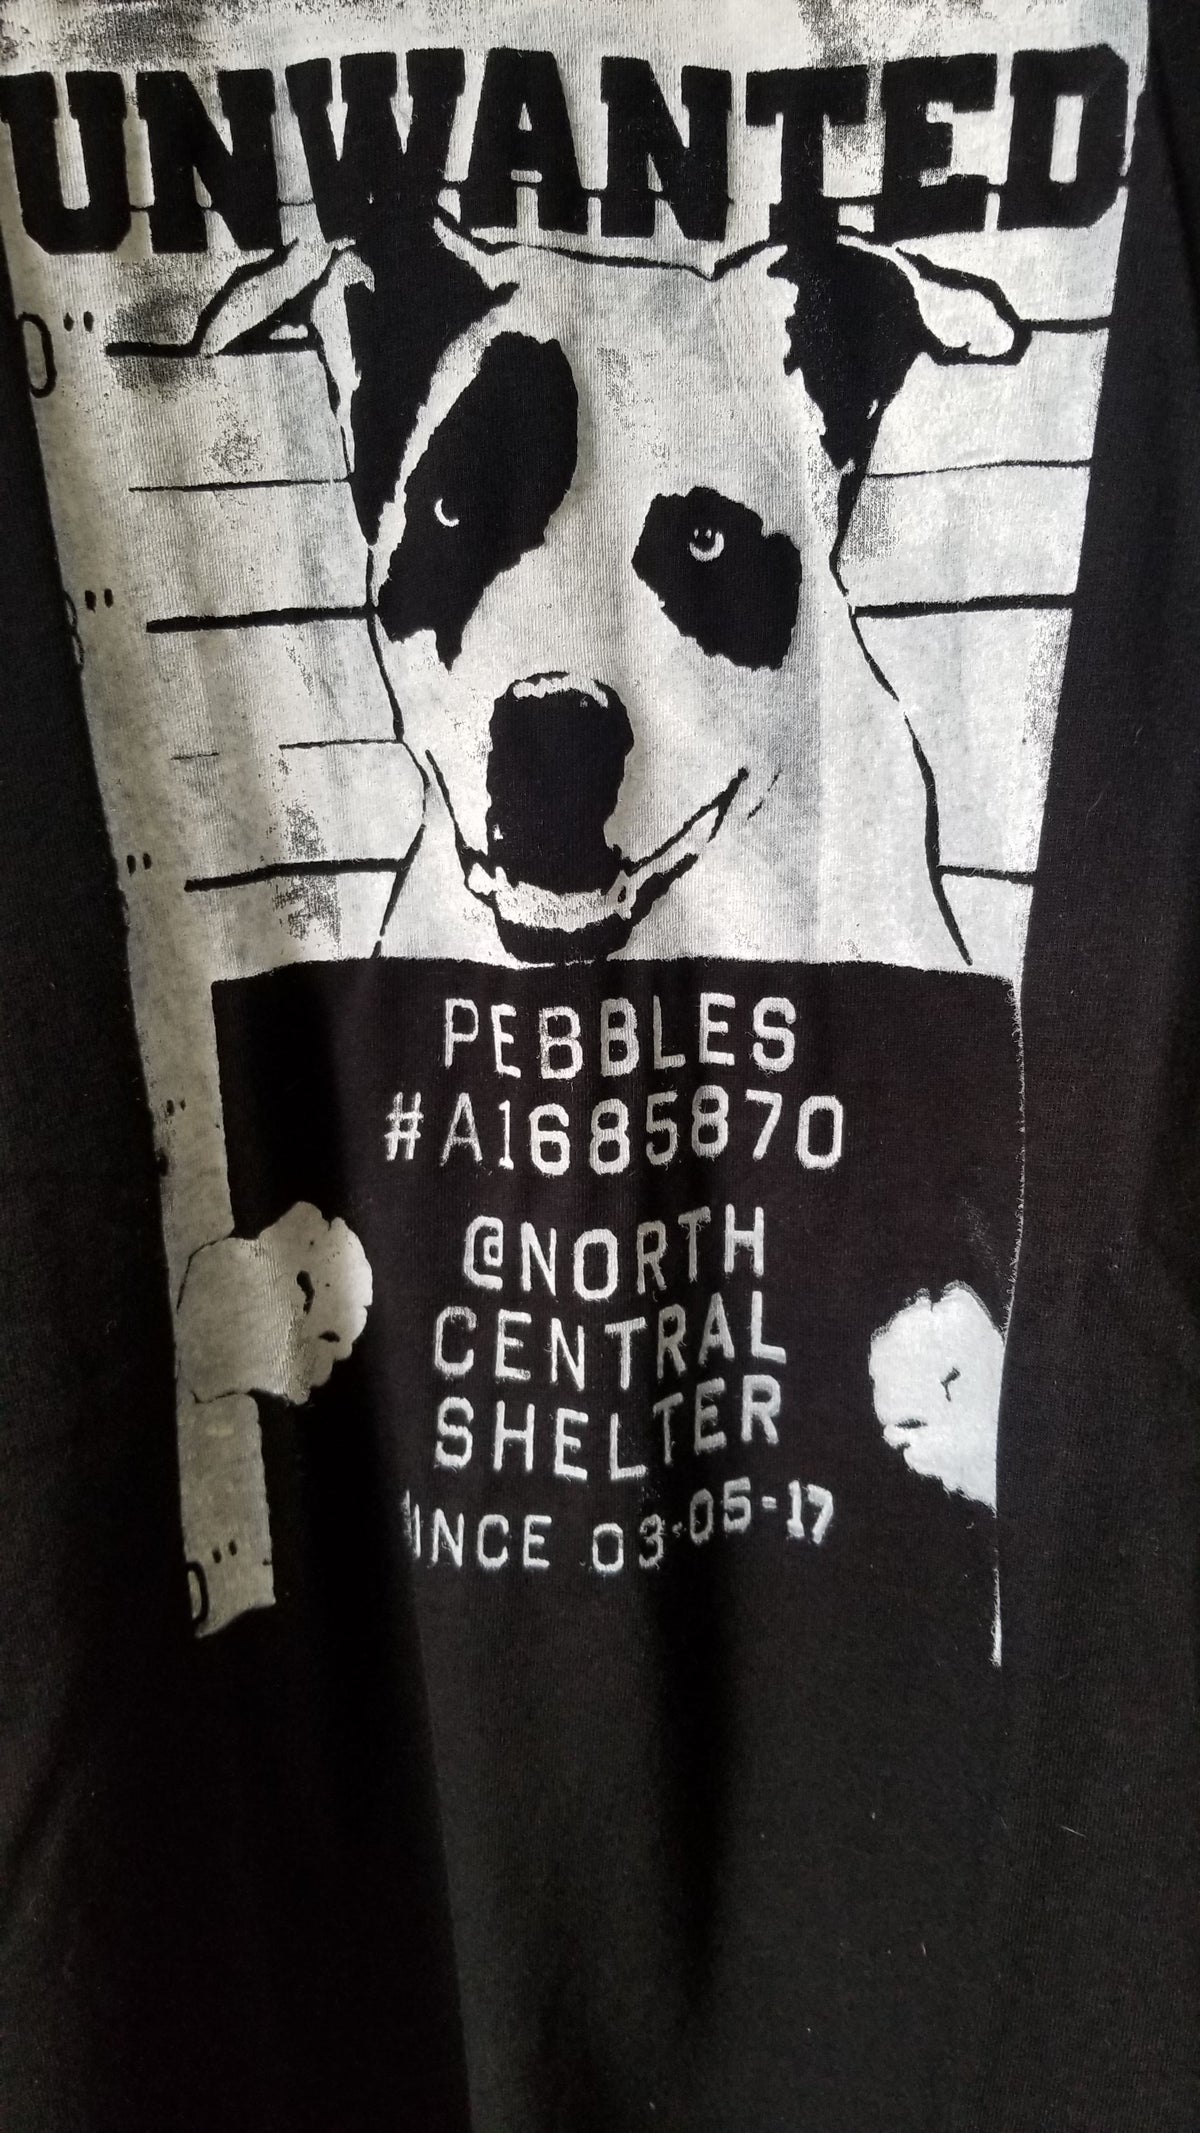 Pebbles - Unwanted Dog T-shirt - Found a Home!